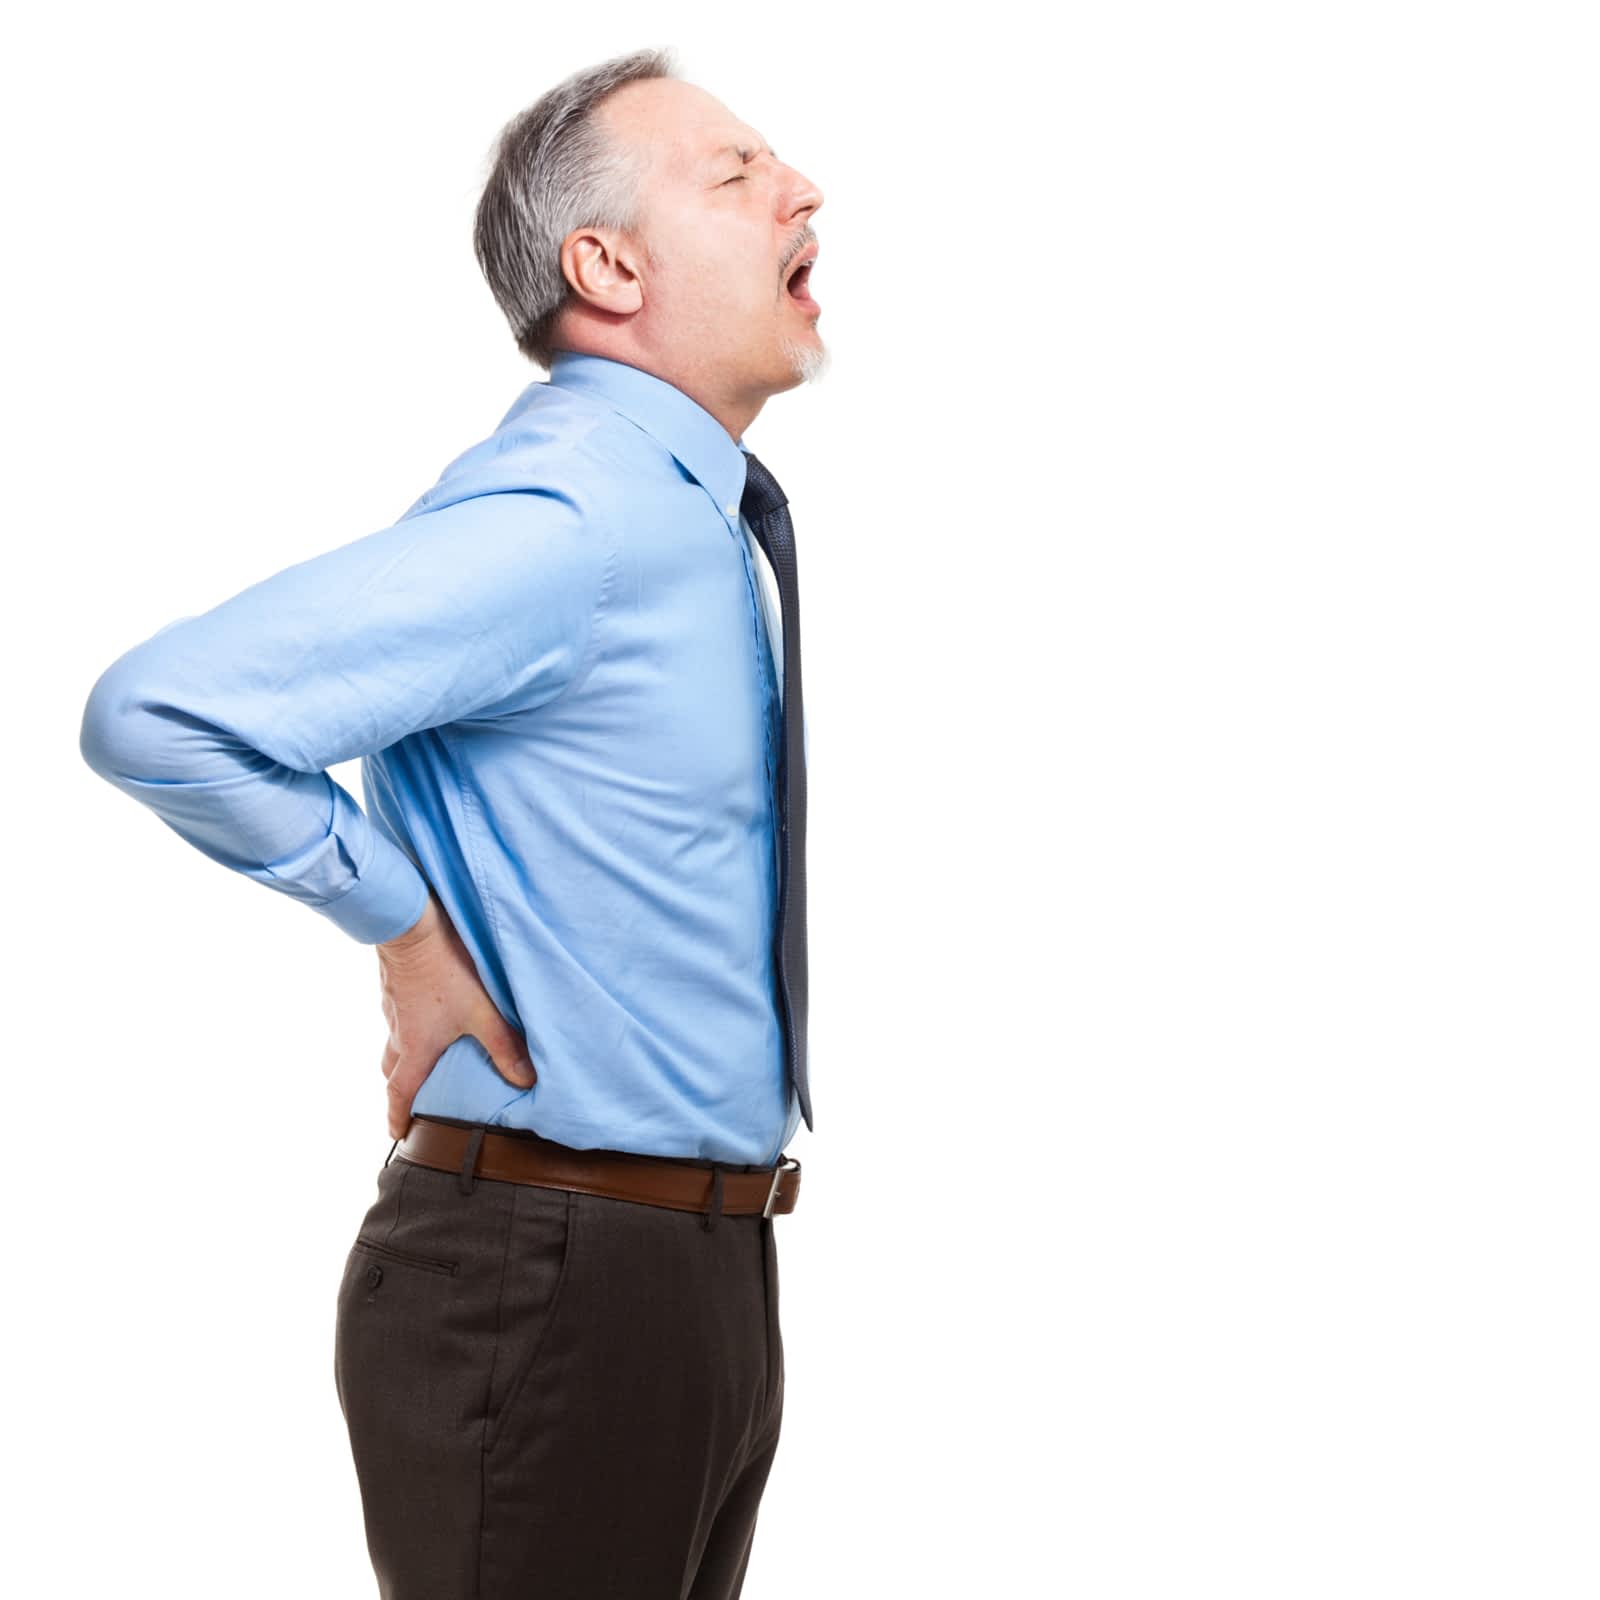 The length of time you have suffered from chronic back pain does not determine how long it will take to fix it